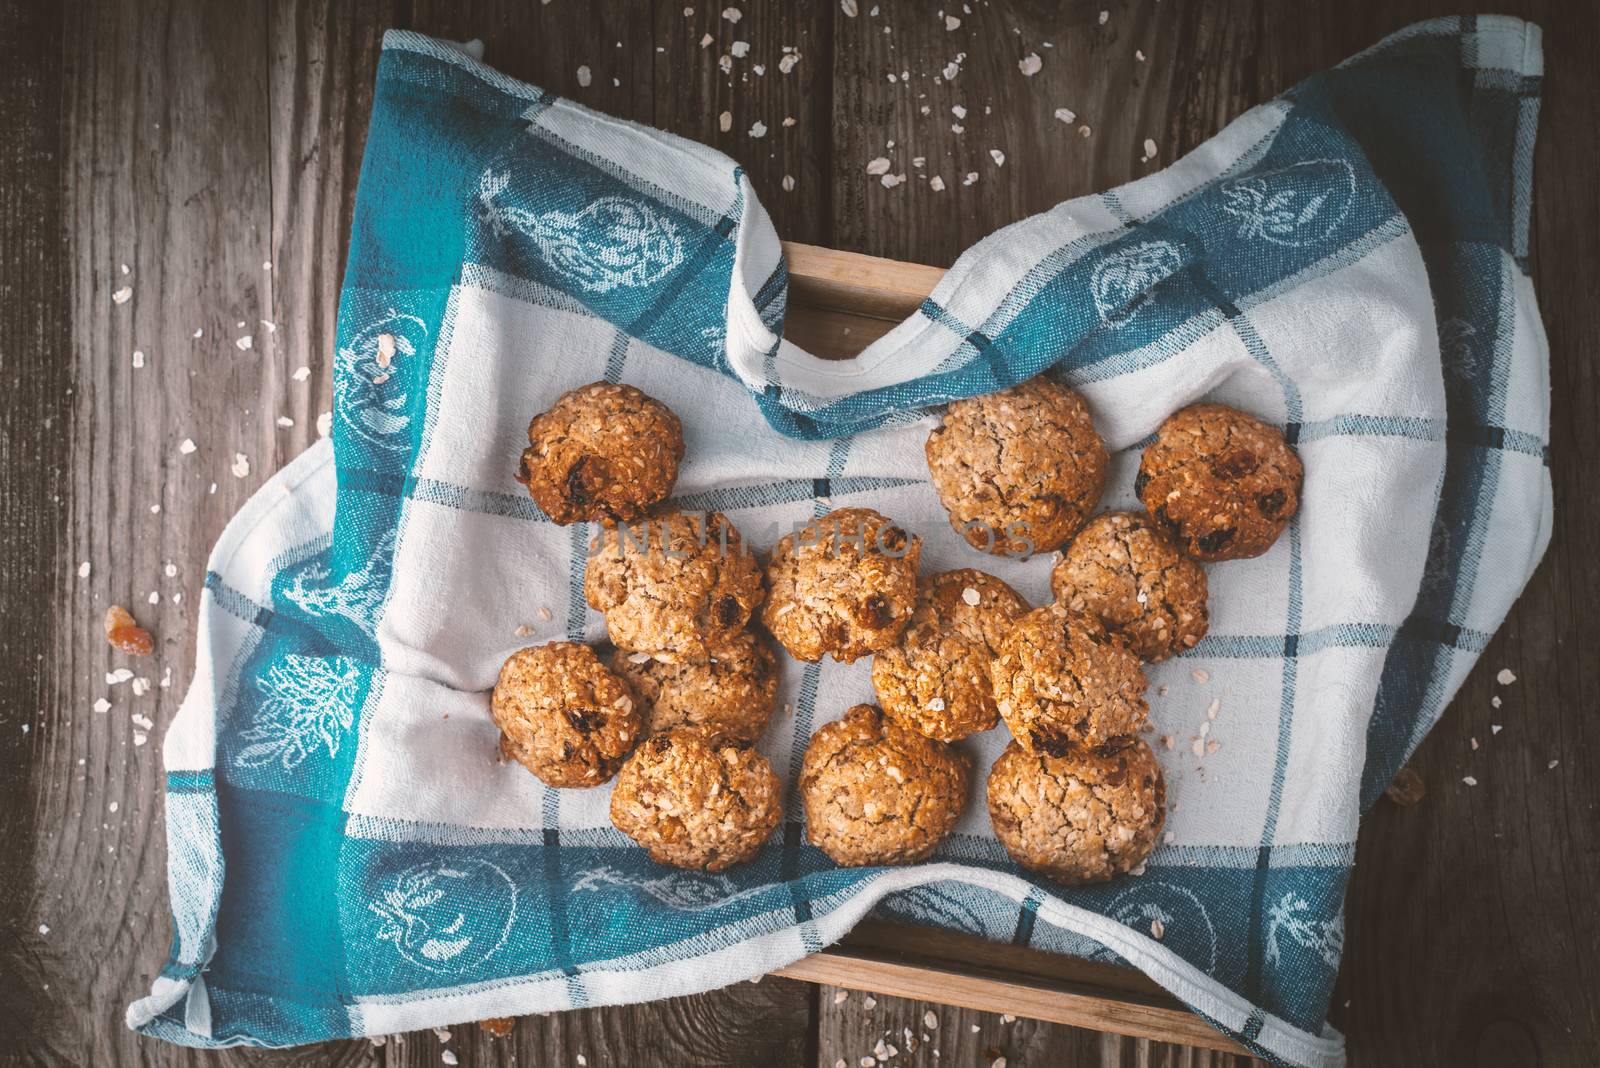 Oatmeal cookies on a towel on the wooden table horizontal